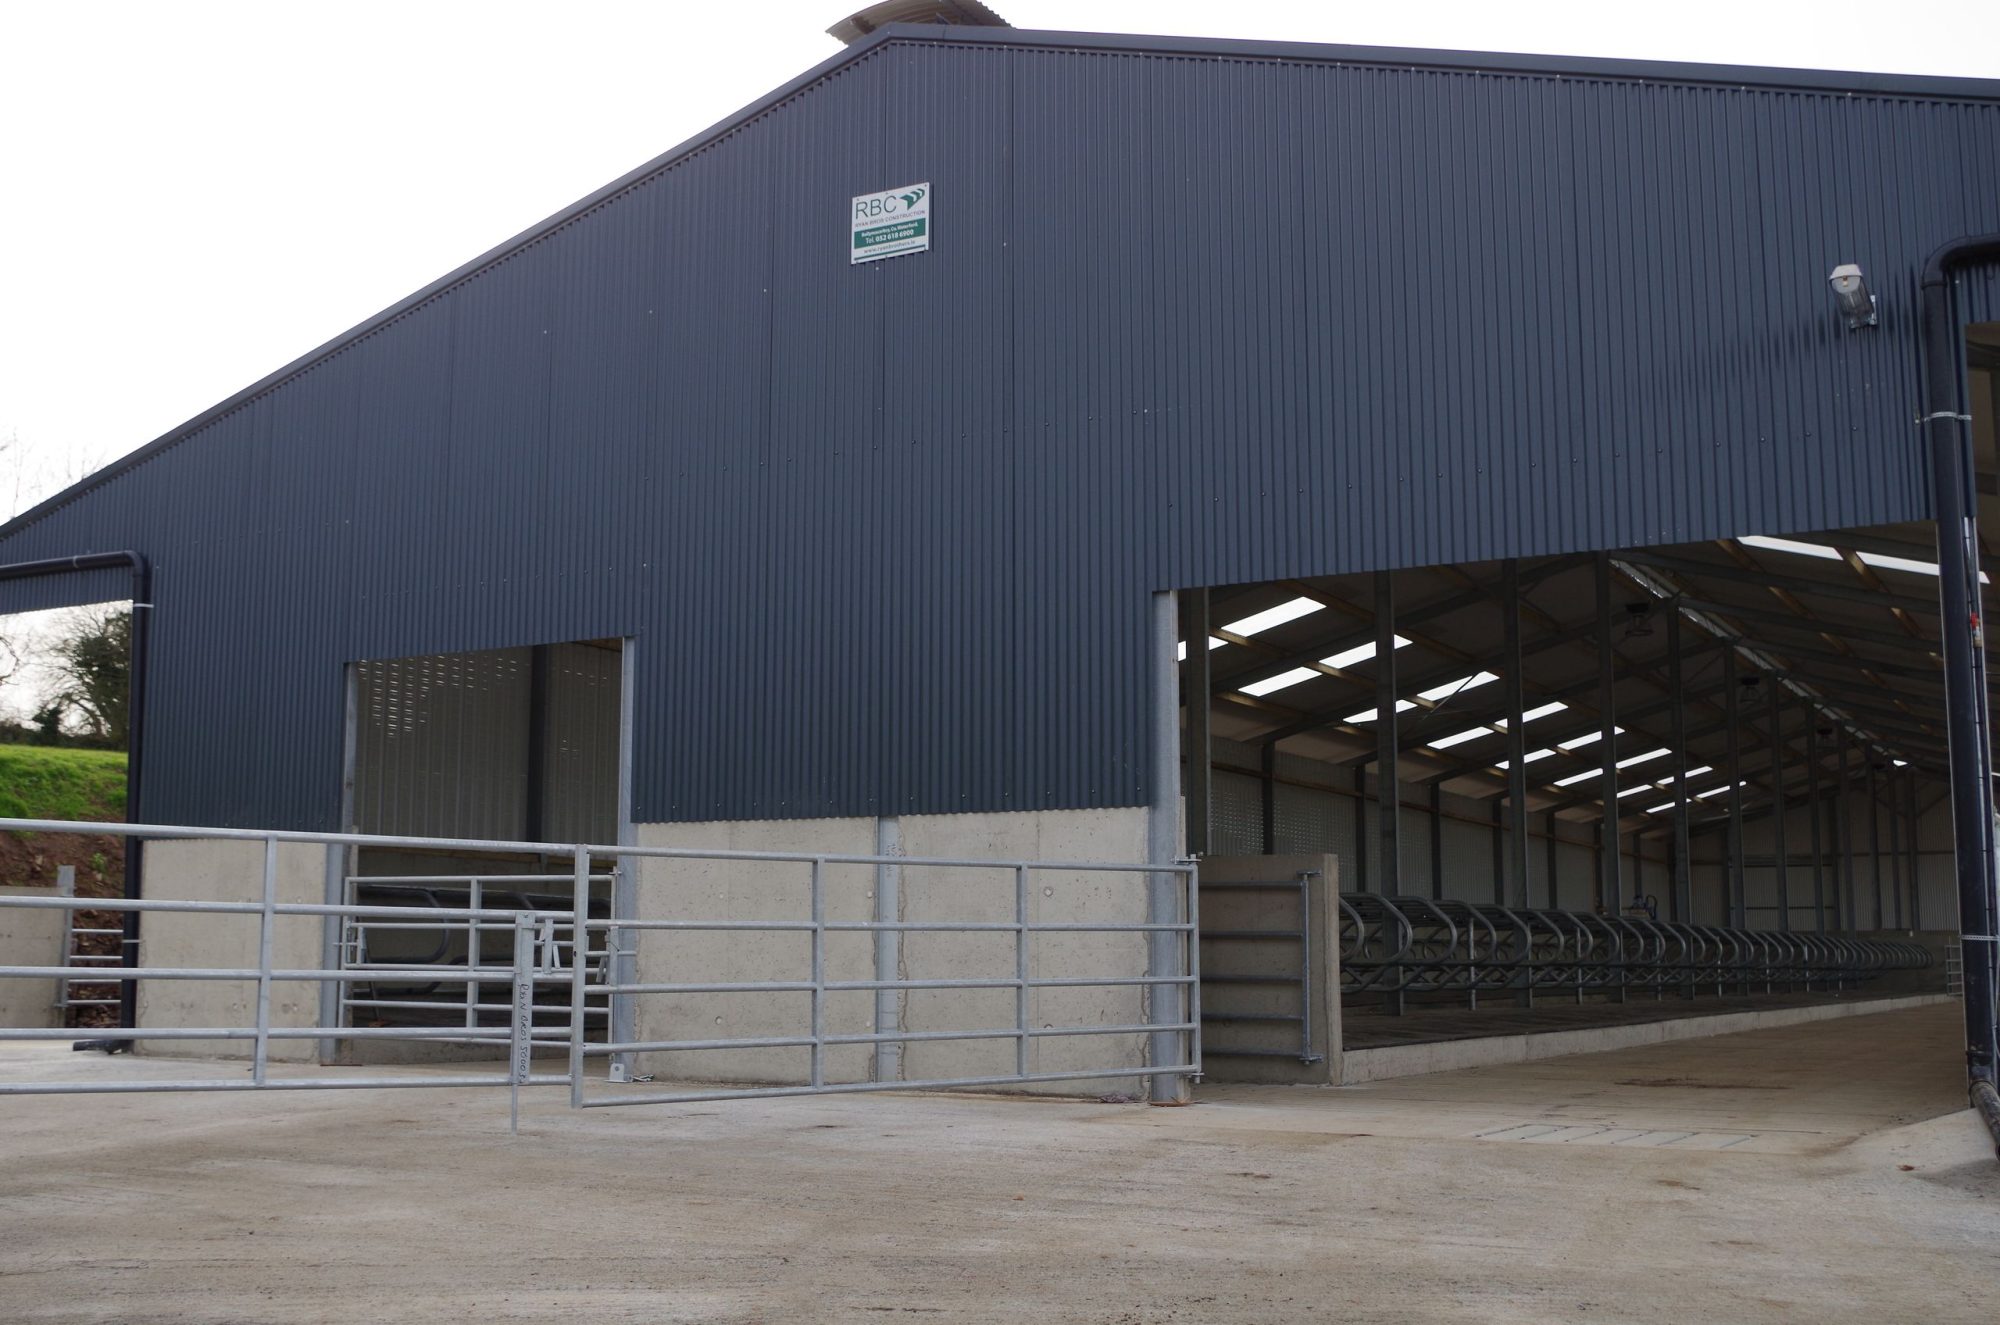 Large steel farming building for milking cows